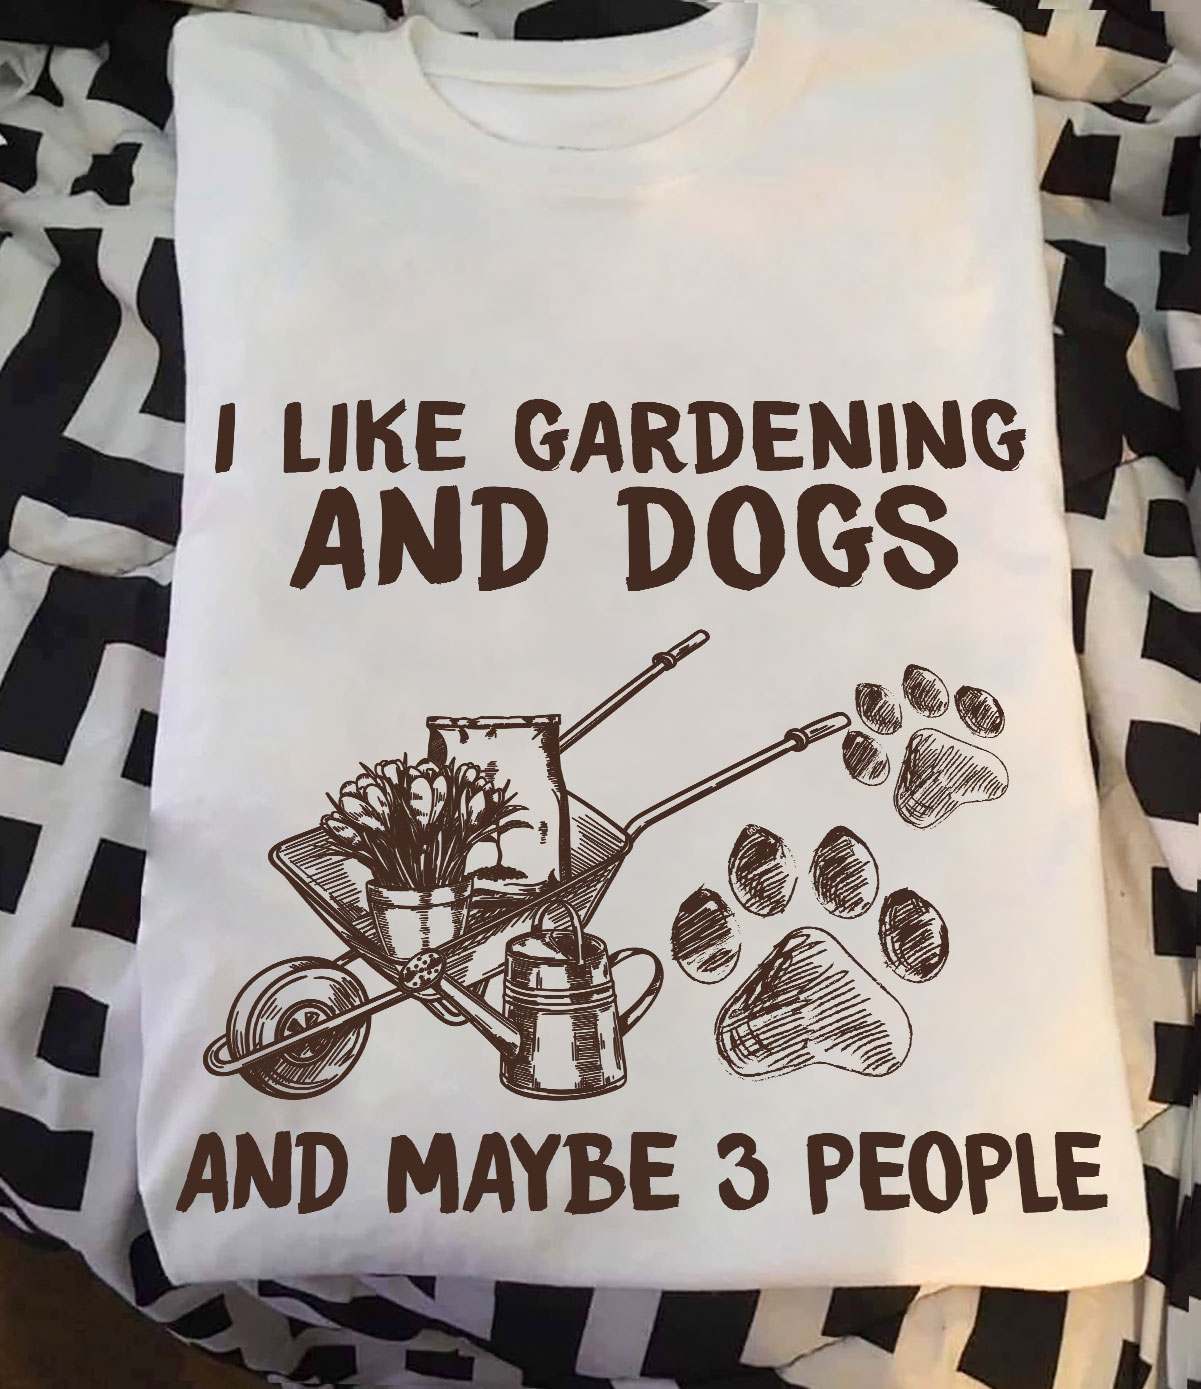 Gardening Dogs - I like gardening and dogs and maybe 3 people